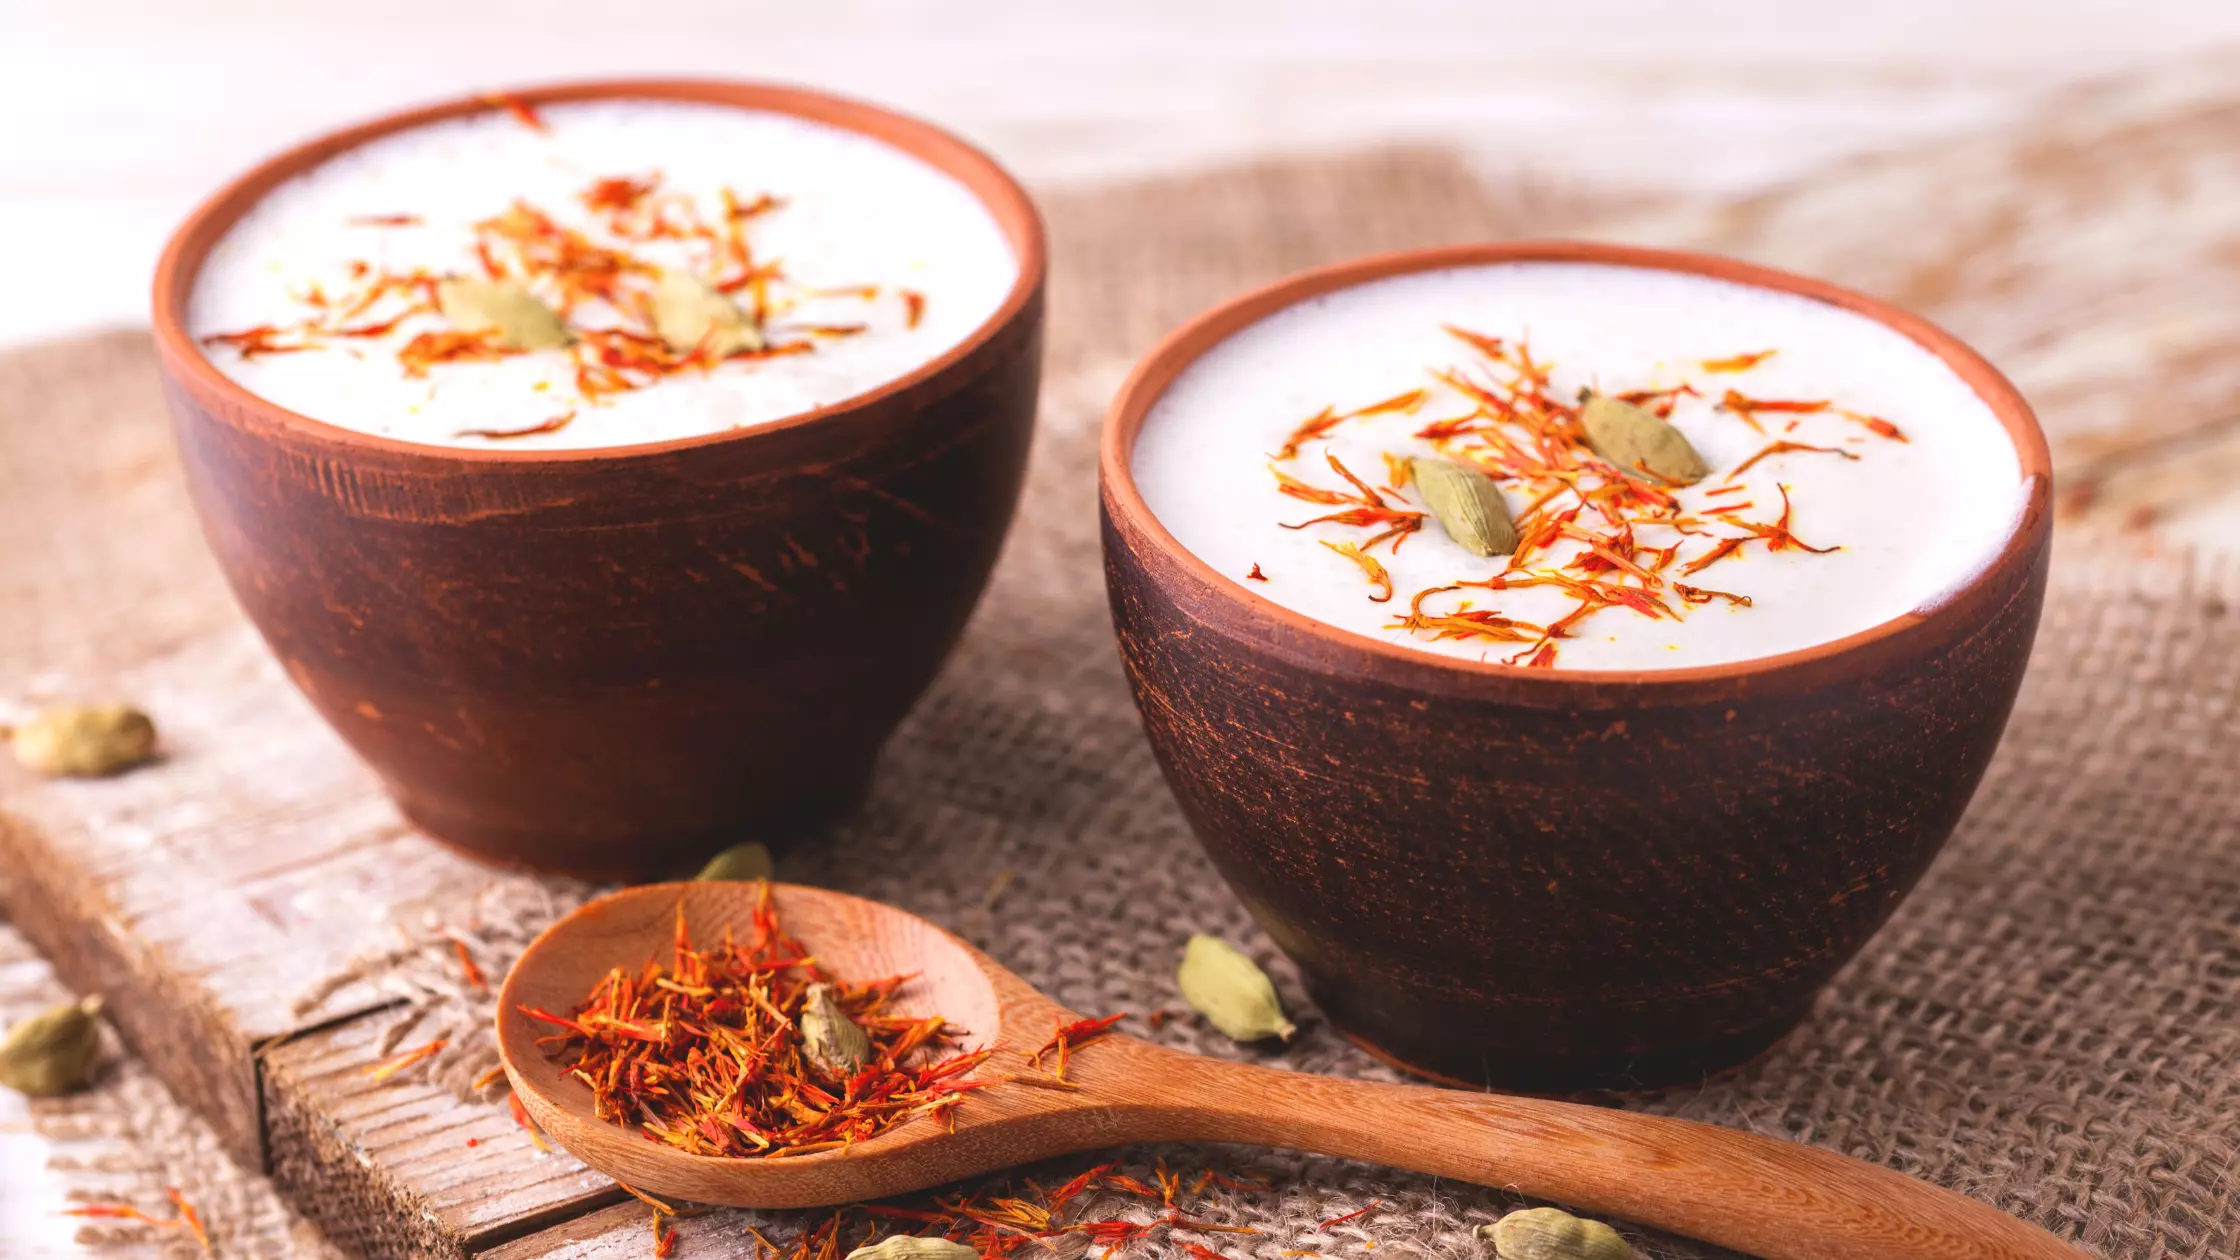 refreshing lassi is a popular drink